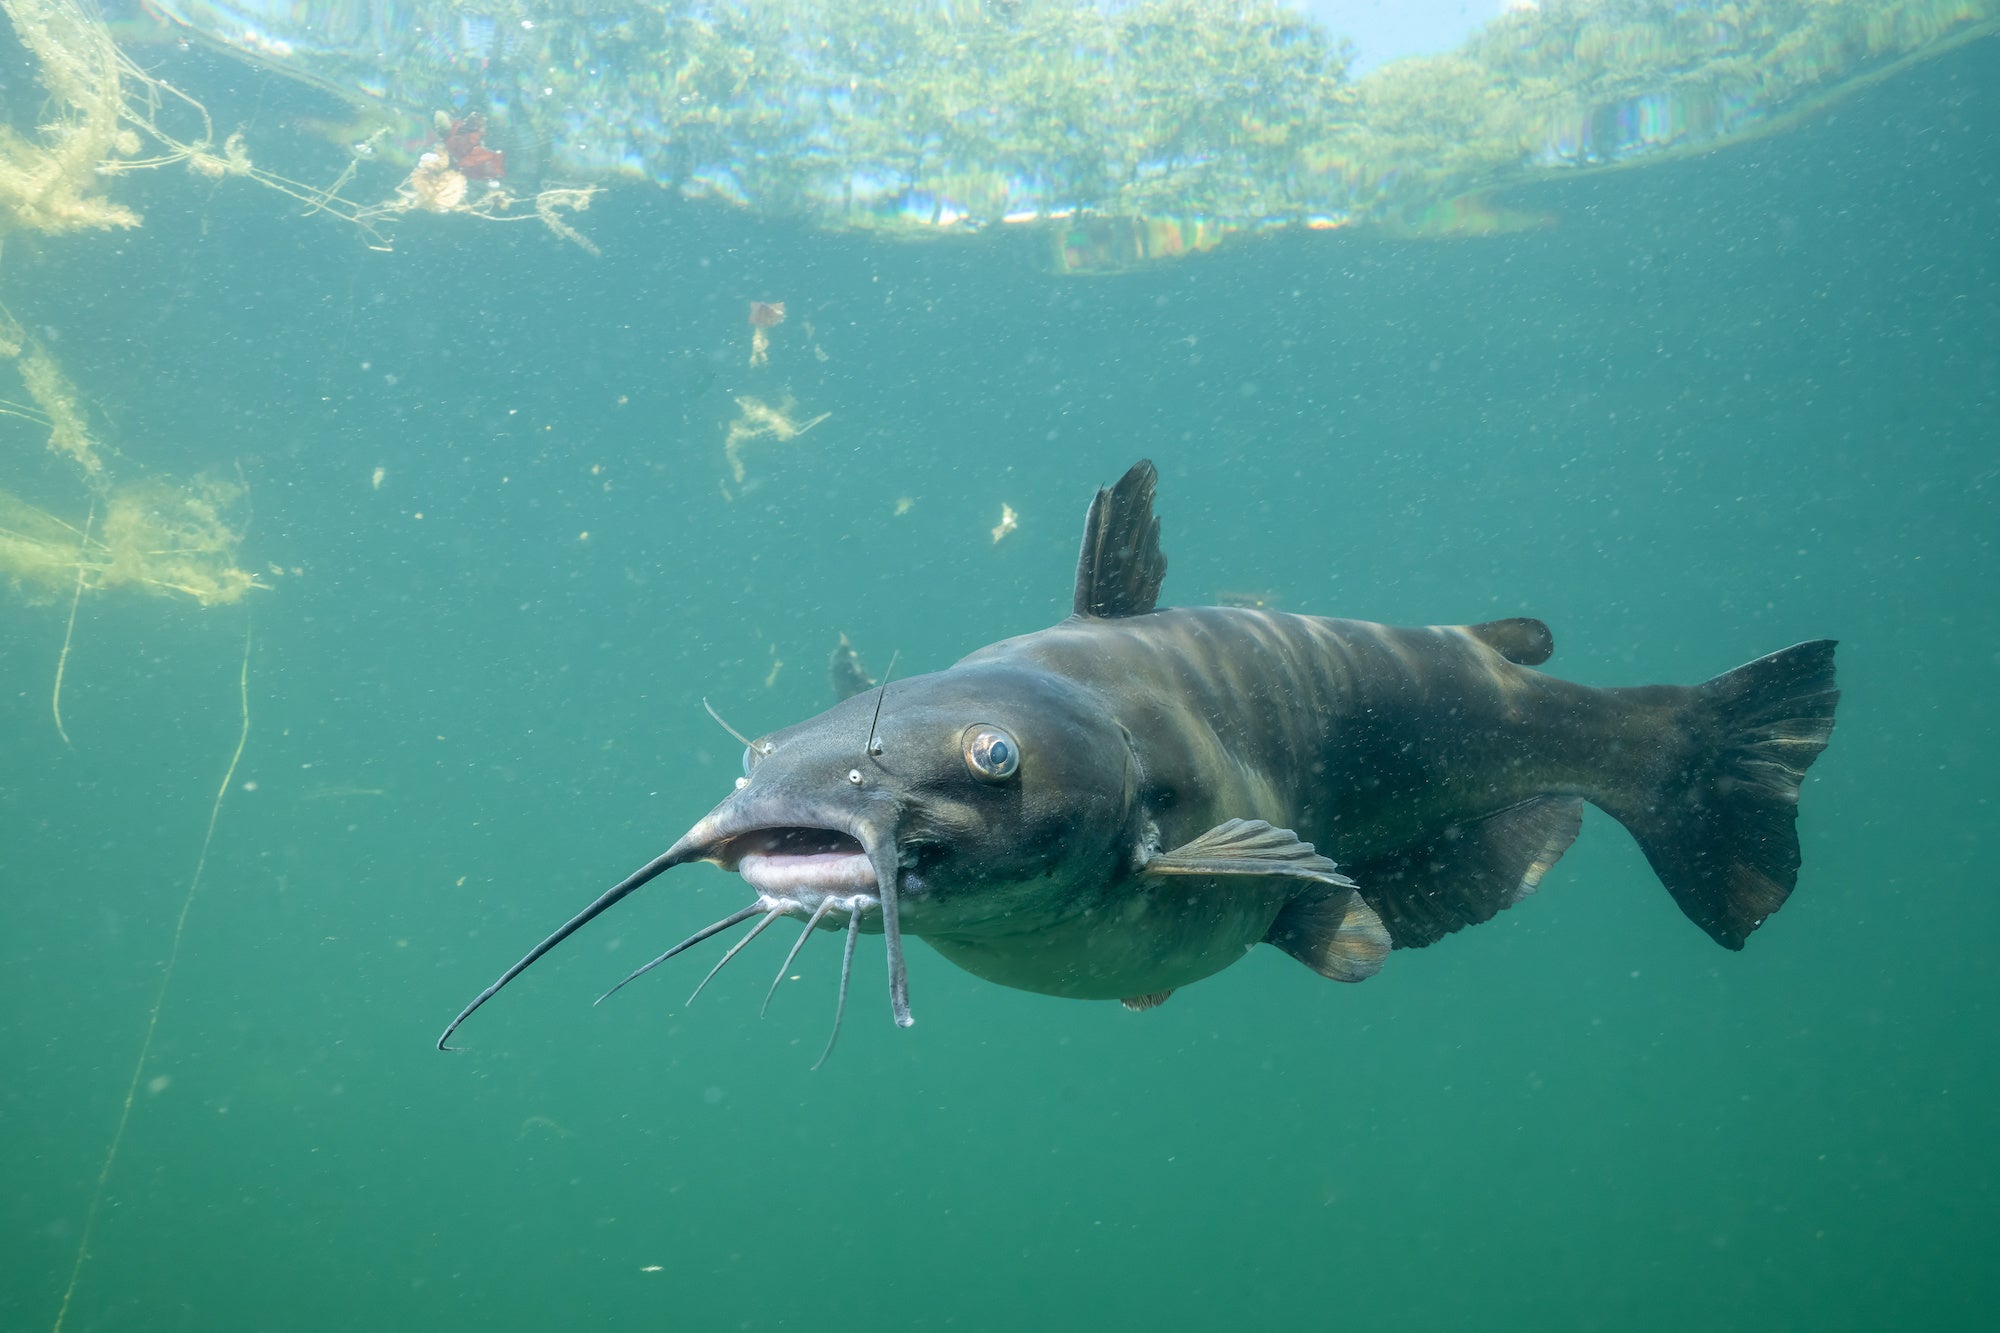 All members of the catfish family, including channel cats (pictured), have barbels around their mouths that they use to find food.